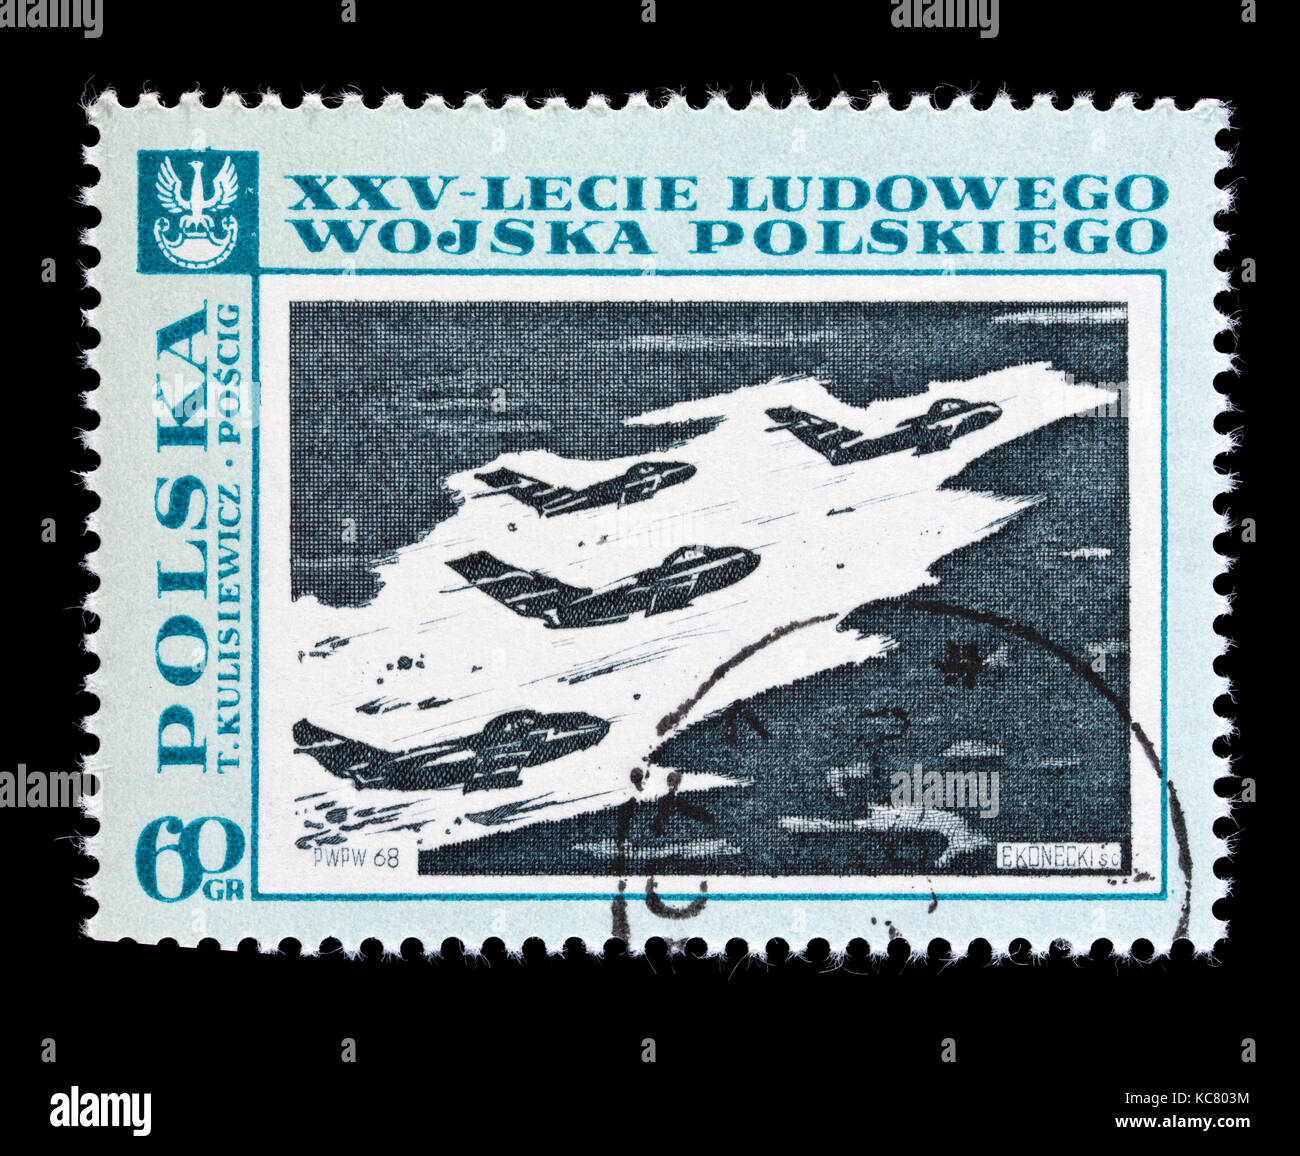 Postage stamp from Poland depicting the T. Kulisiewicz painting 'Pursuit', fighter planes, for the Polish People's Army, 25'th anniversary Stock Photo